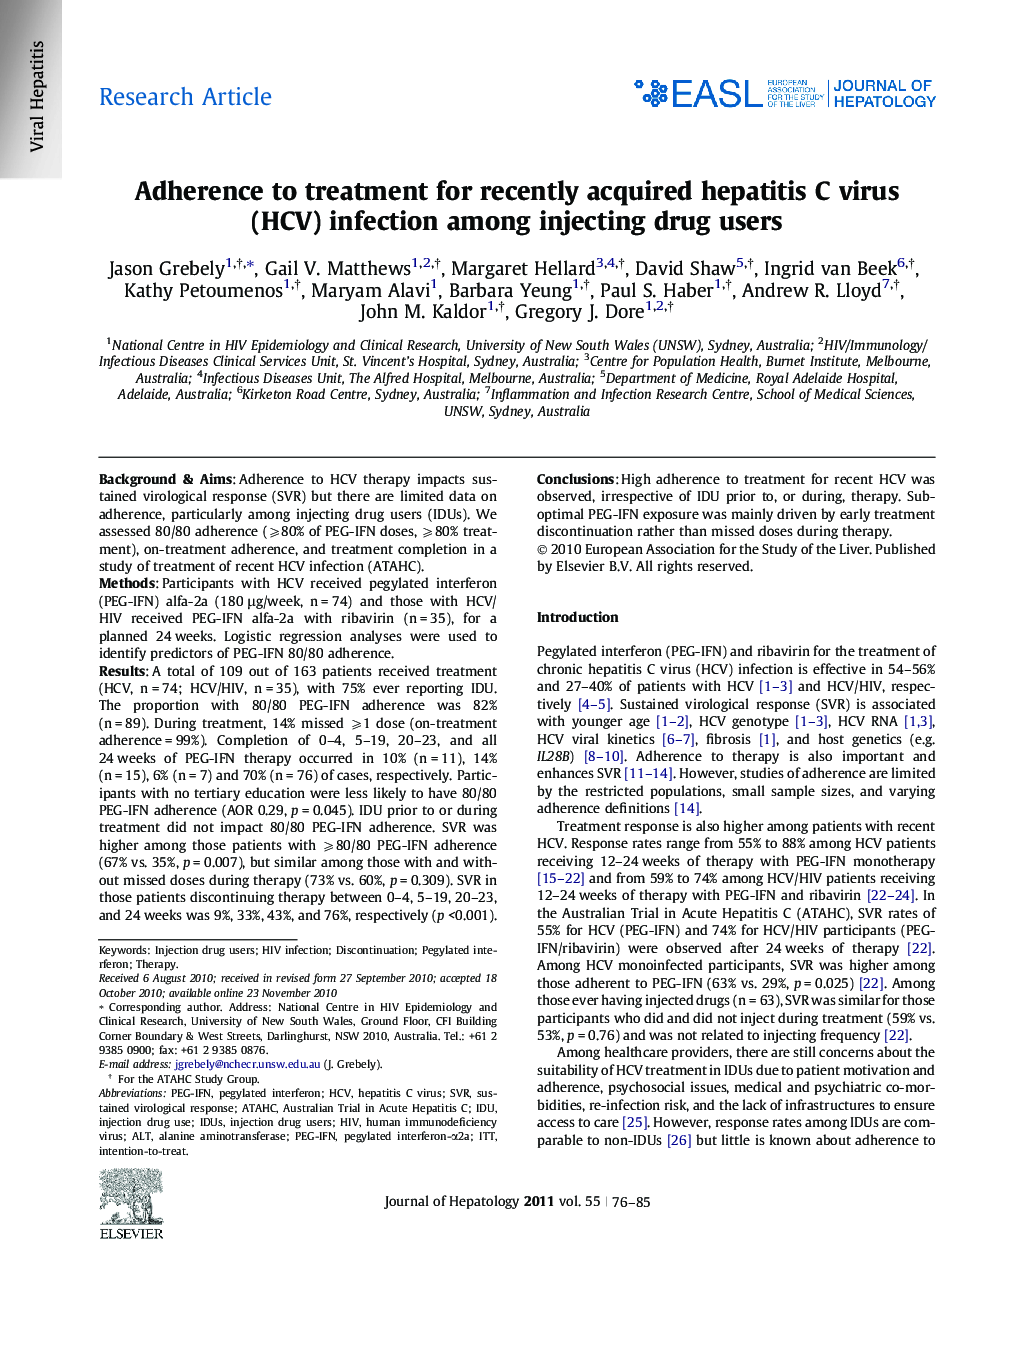 Research ArticleAdherence to treatment for recently acquired hepatitis C virus (HCV) infection among injecting drug users